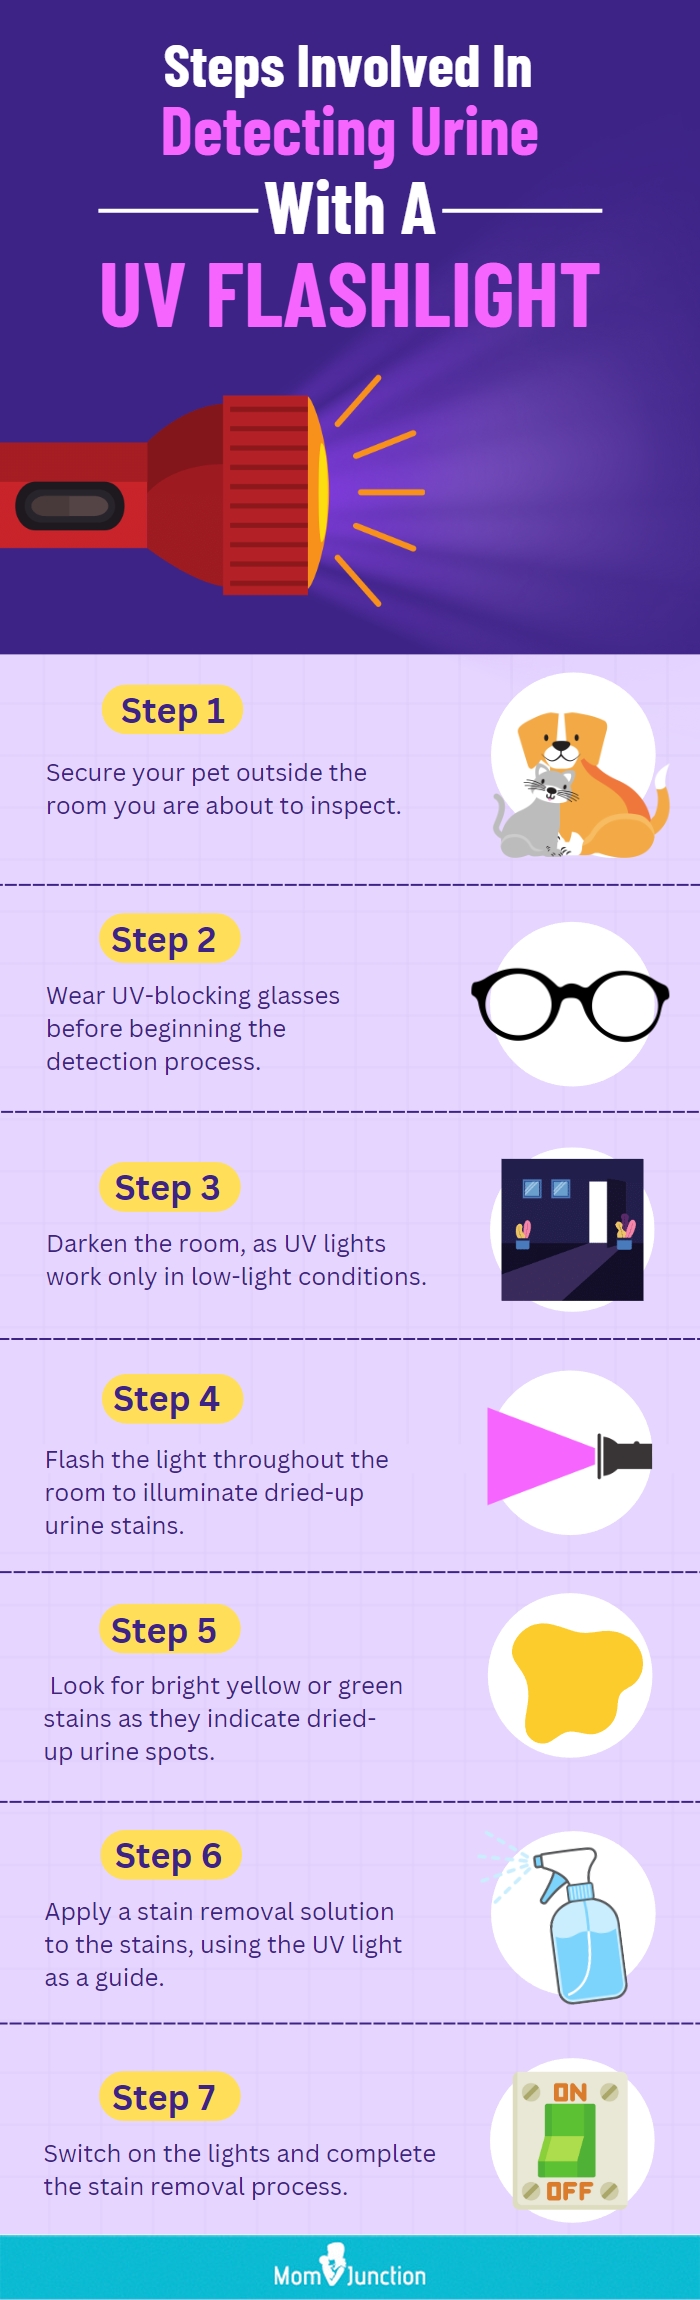 Steps Involved In Detecting Urine With A UV Flashlight (infographic)